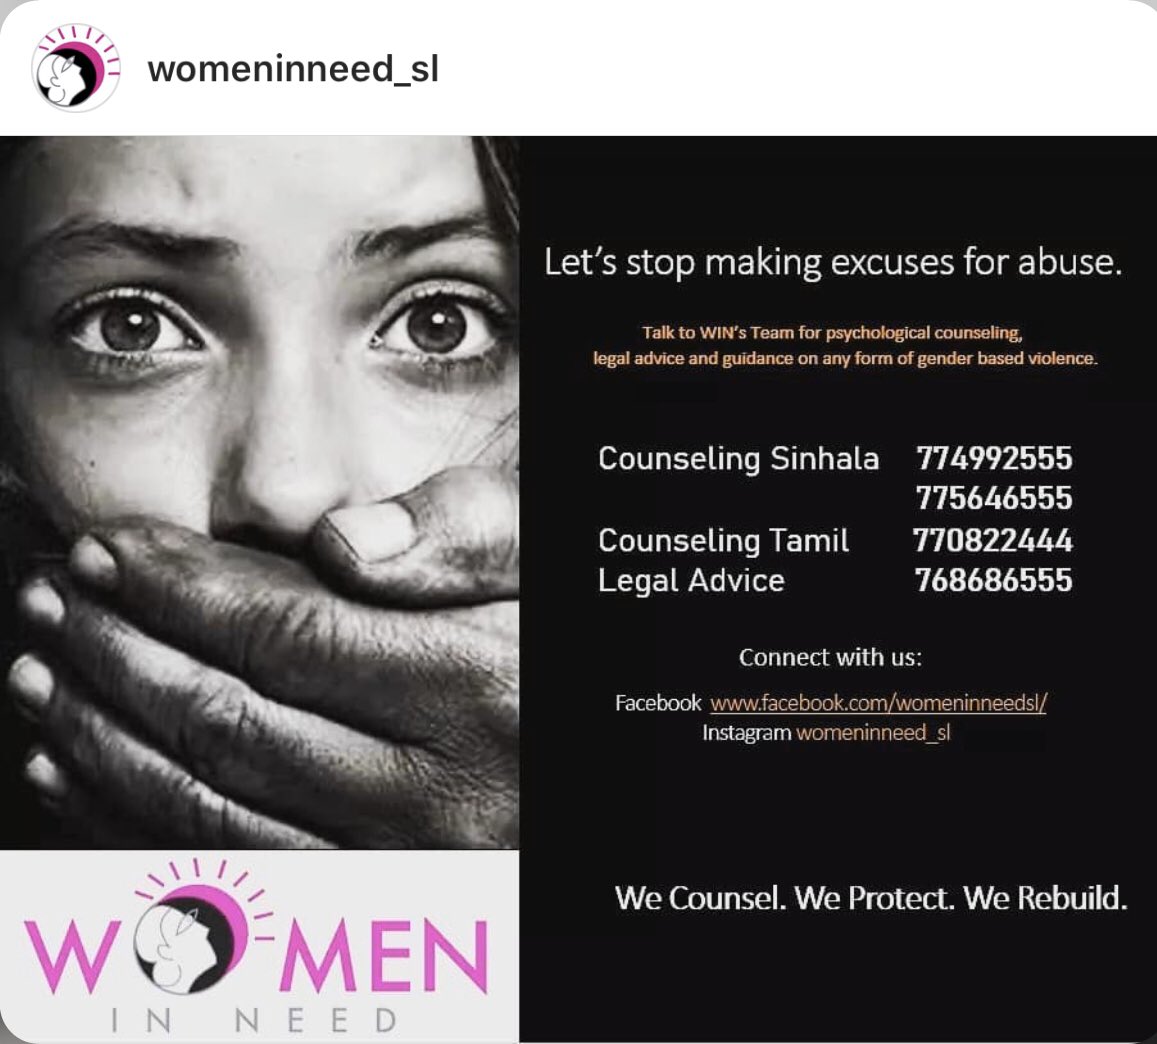 You are not in isolation! Get in touch with #WomenInNeed w/ contact details listed below